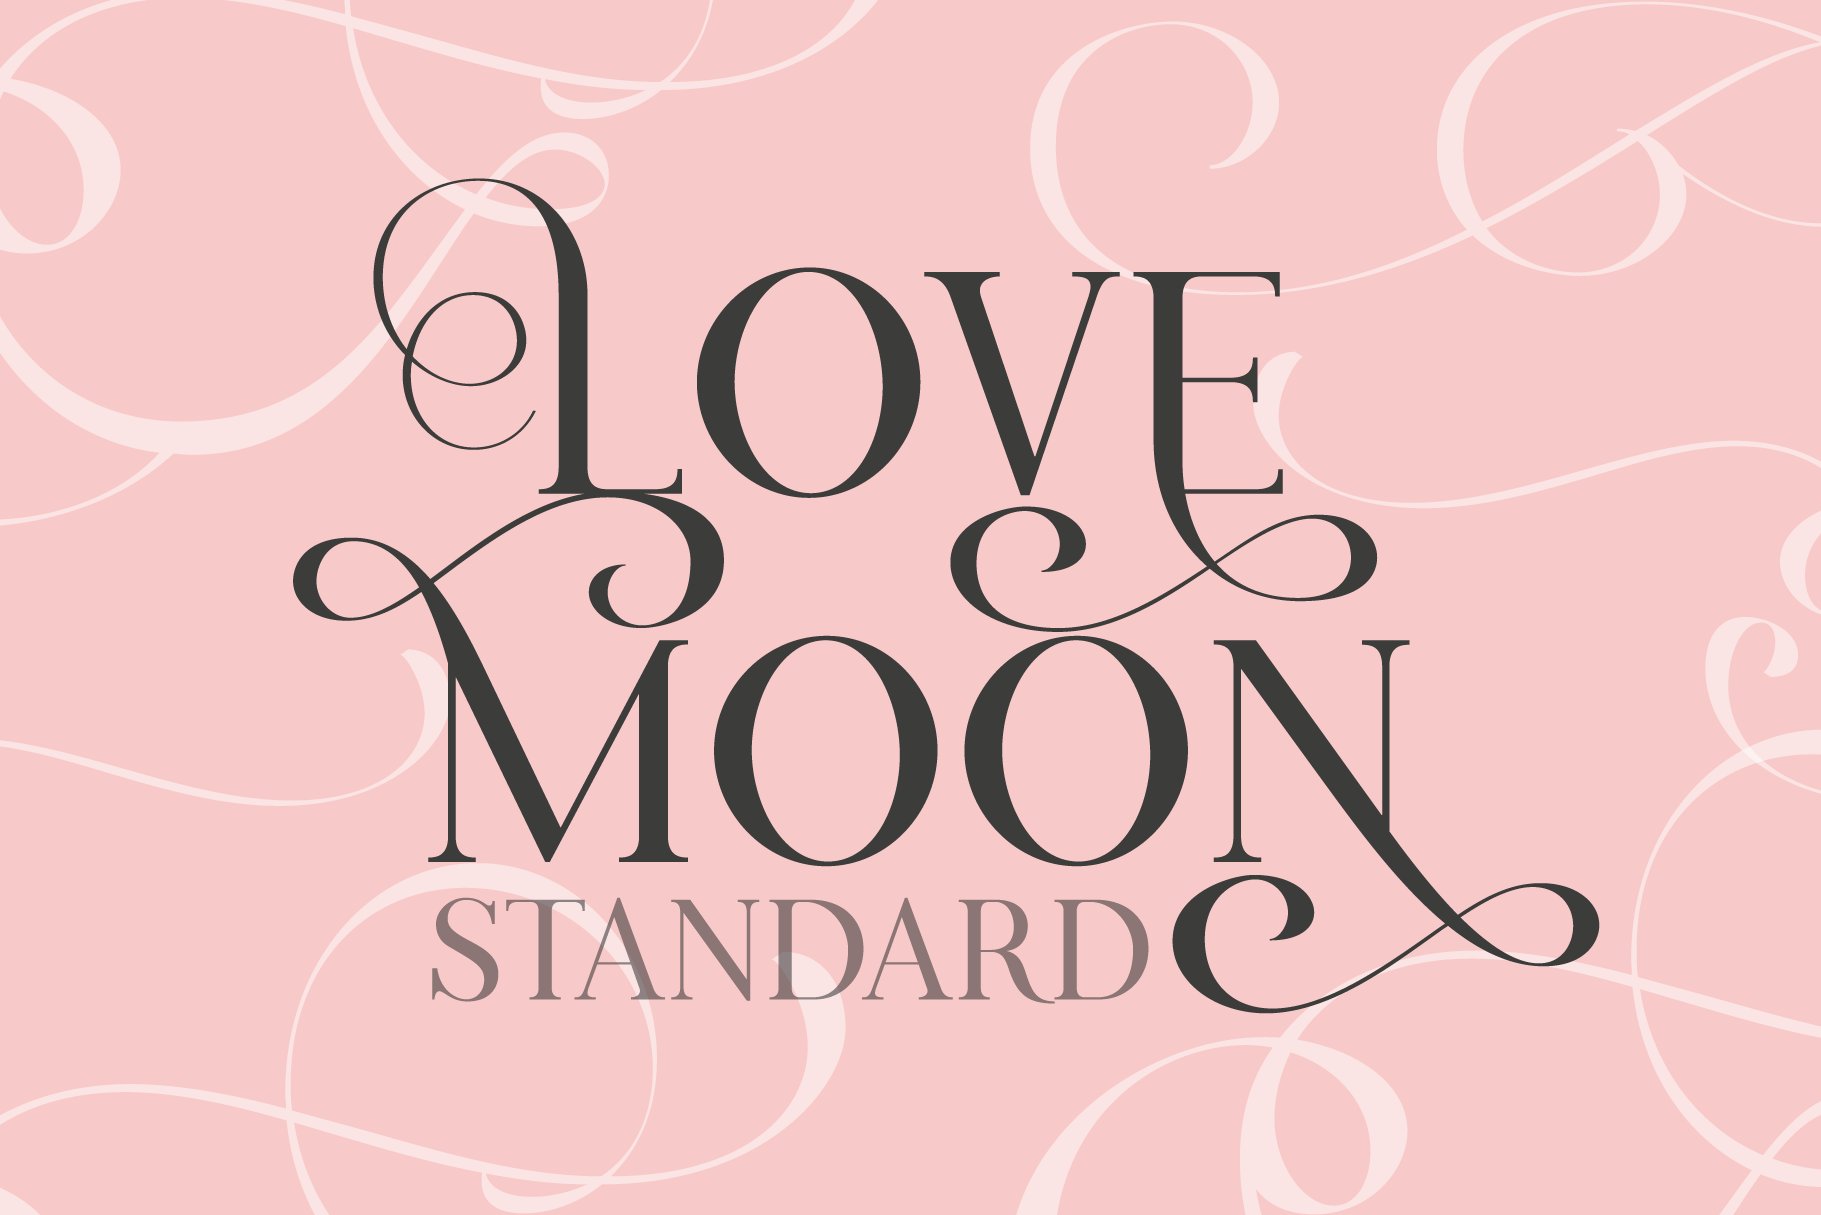 Love Moon Standard cover image.